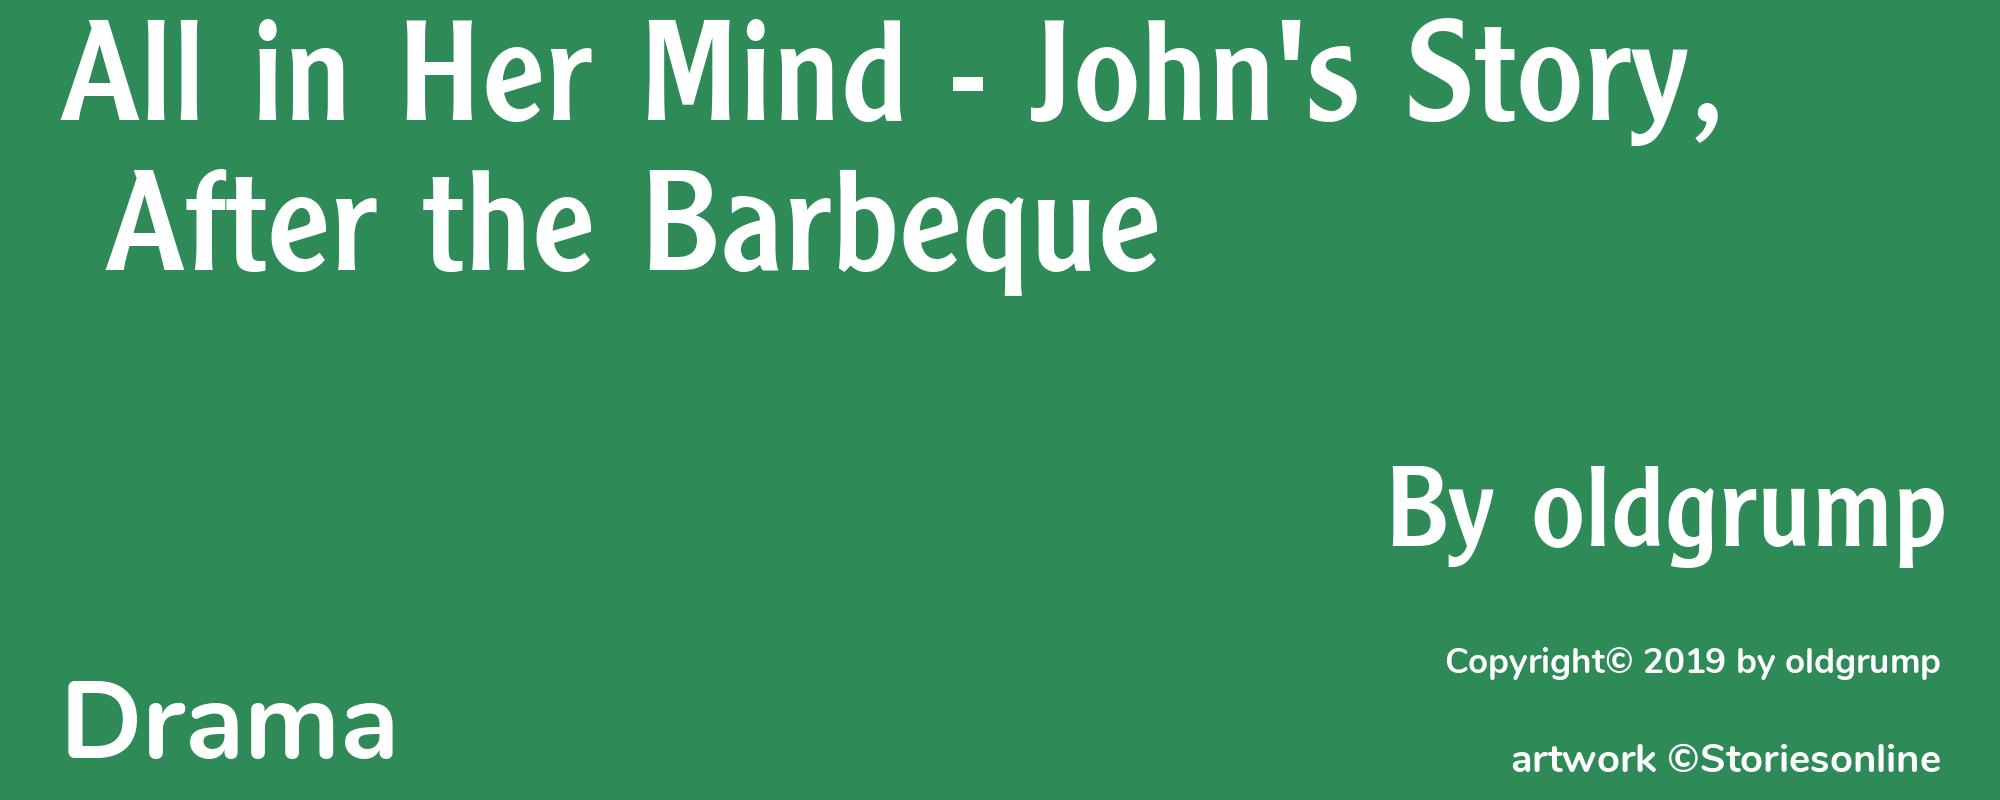 All in Her Mind - John's Story, After the Barbeque - Cover